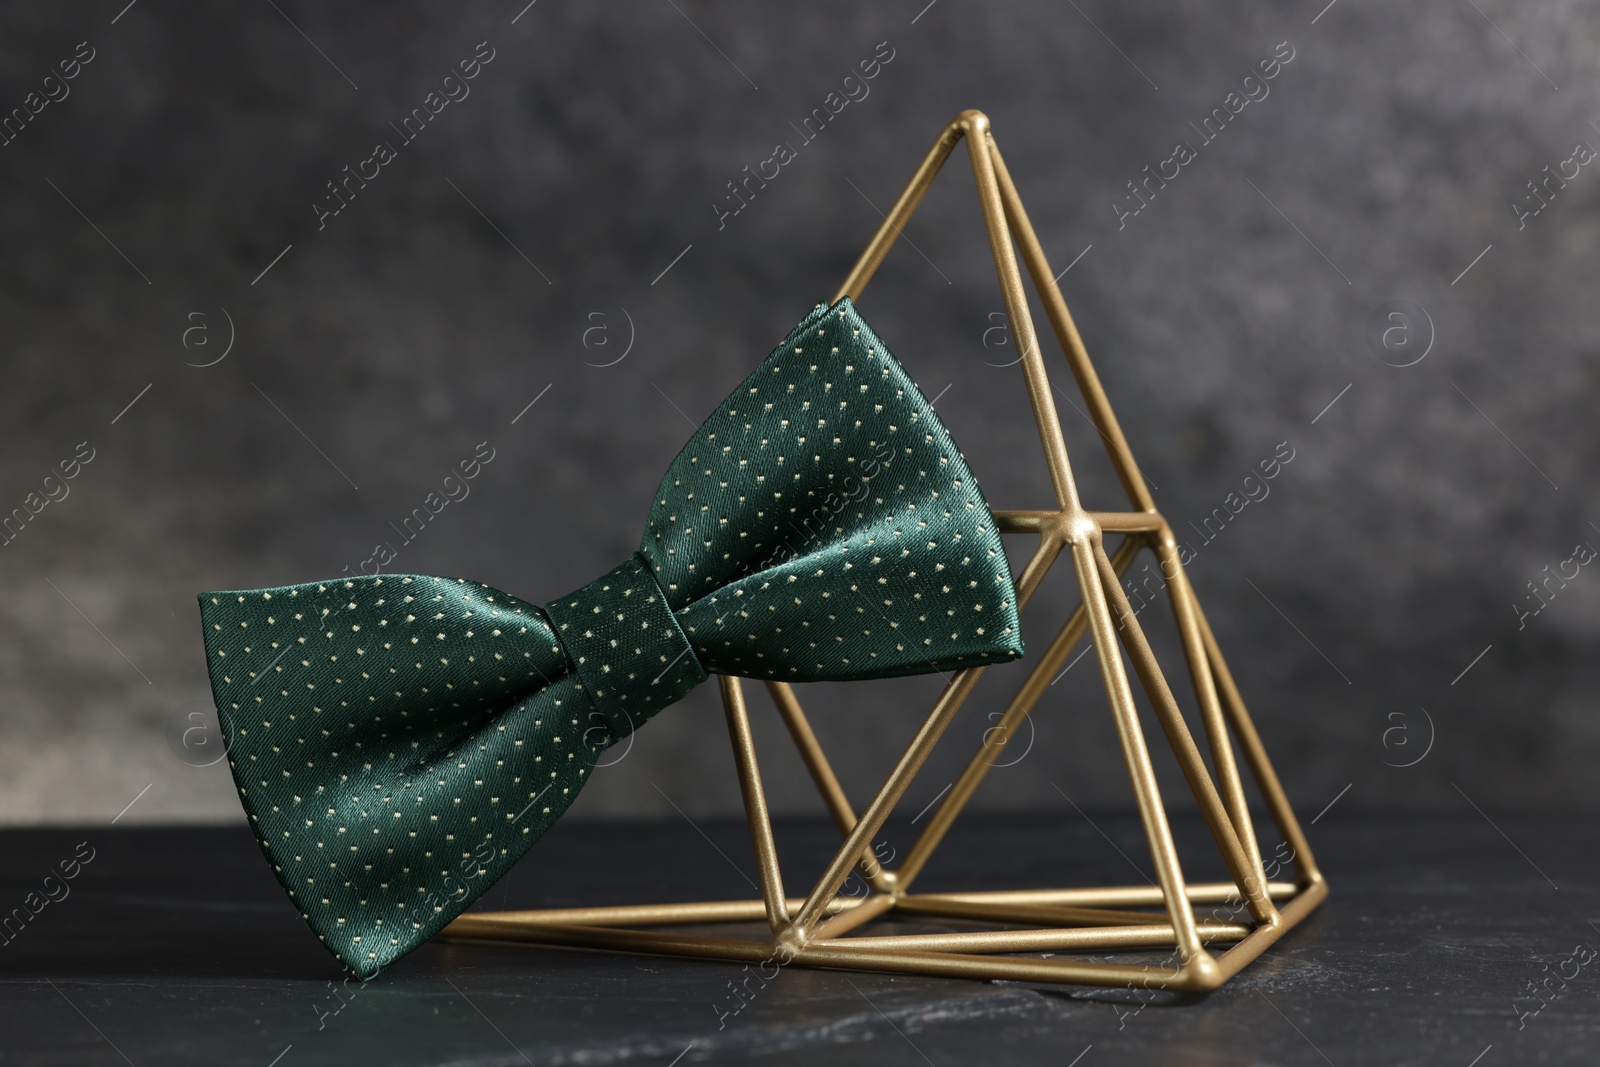 Photo of Stylish presentation of green bow tie on black table against gray background